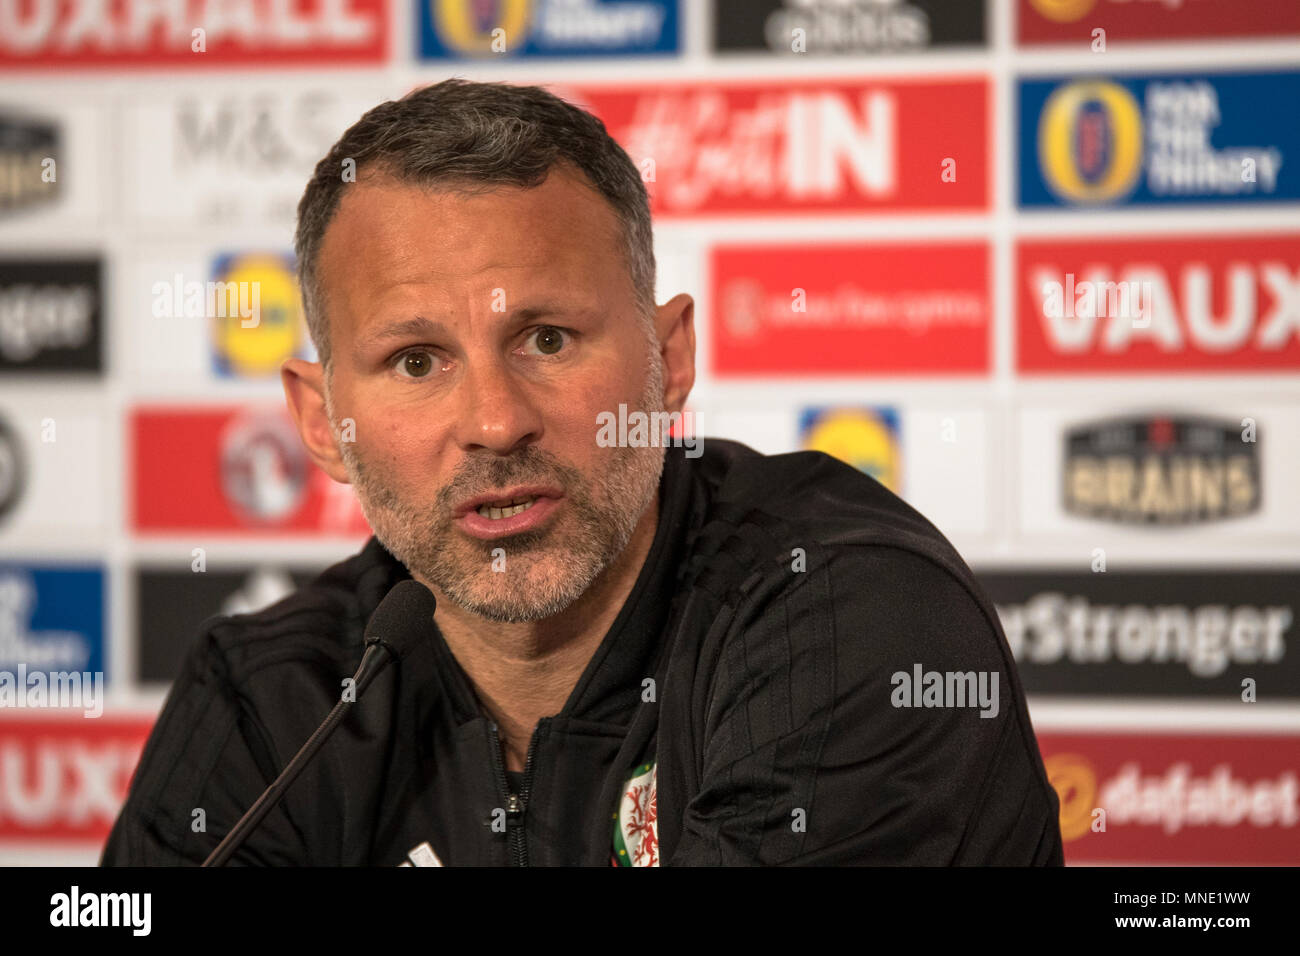 Cardiff, Wales, UK. 16th May 2018. Ryan Giggs Wales Press Conference, St Fagans Museum, Cardiff, Wales, 16/05/18 - Wales' international football manager, Ryan Giggs, has announced his squad for the upcoming friendly international against Mexico in California, USA. Credit: Andrew Dowling/Influential Photography/Alamy Live News Stock Photo